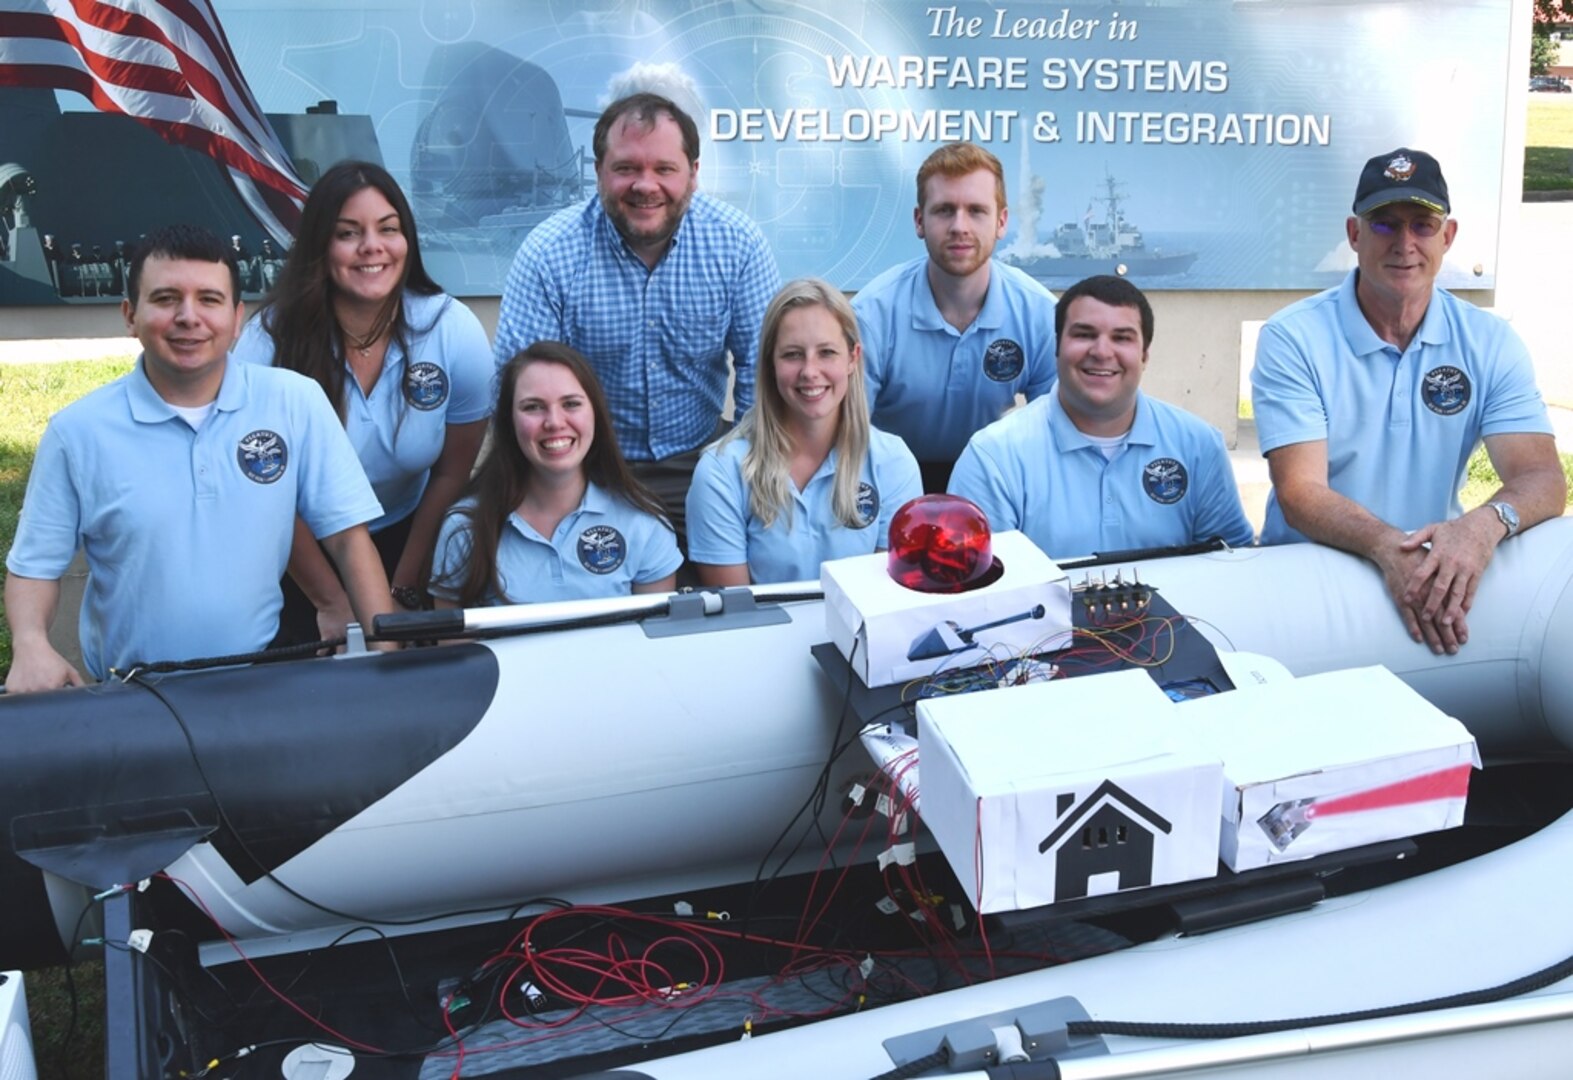 IMAGE: DAHLGREN (June 6, 2019) - The Naval Surface Warfare Center Dahlgren Division (NSWCDD) Sly Fox Mission 25 team and mentors are pictured with a Rigid Hull Inflatable Boat integrated with a hardware representation of PEGASUS – Power and Energy Generation Analysis SimUlation System. The team proved the potential of PEGASUS to integrate electric weapons and electric propulsion systems aboard Navy ships in several demonstrations held at NSWCDD. Left to right in the front row are Daniel Apolinar, Alexa Thomas, Courtney Fredrickson, Peter Corrao and Tony Scaramozzi (mentor). Back row: Marie Zacarias Morro, Thomas Mckelvey (mentor), and Joshua Hellerick.